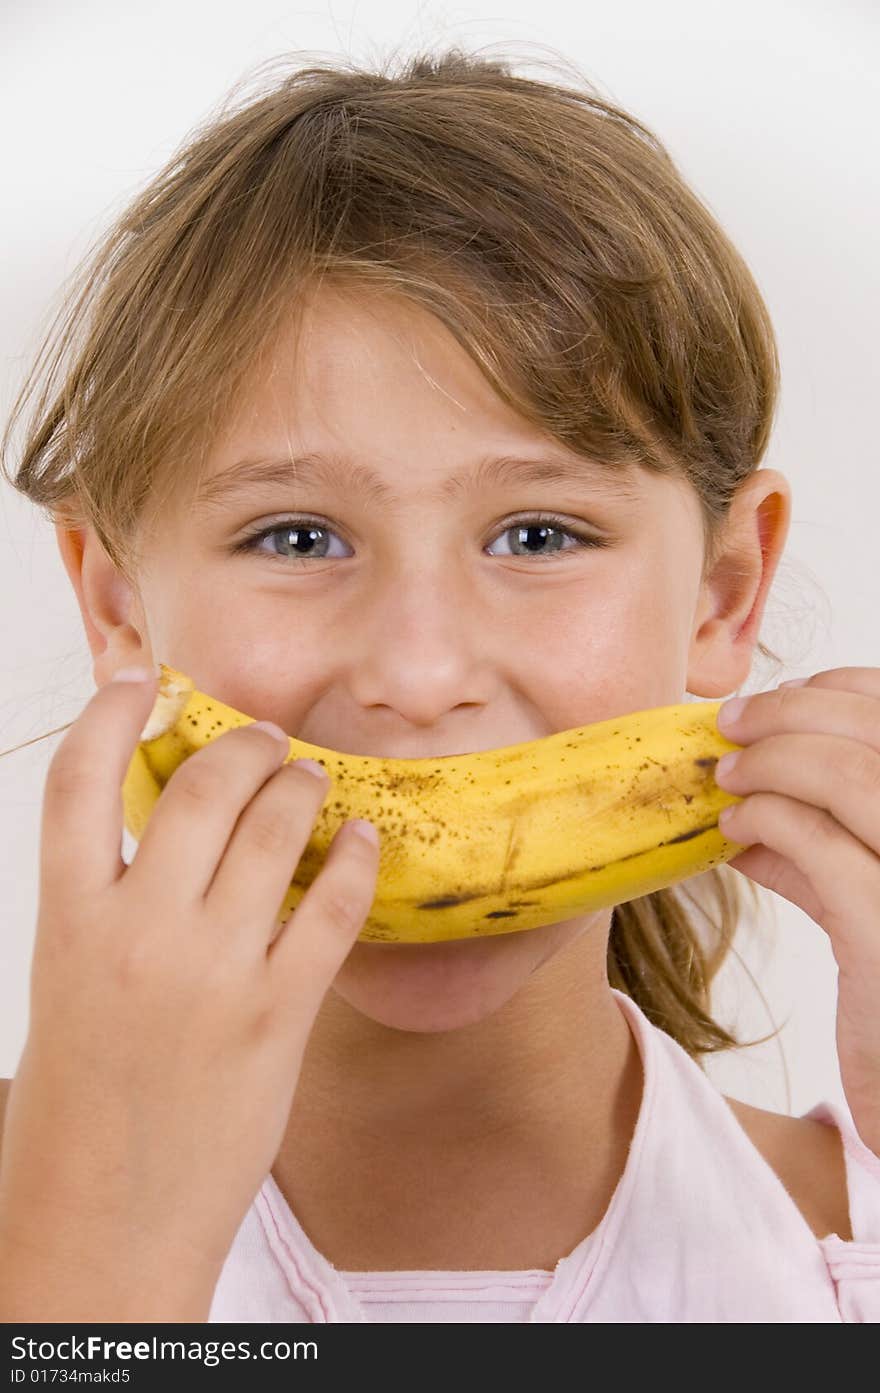 Little girl eating banana and looking at the camera